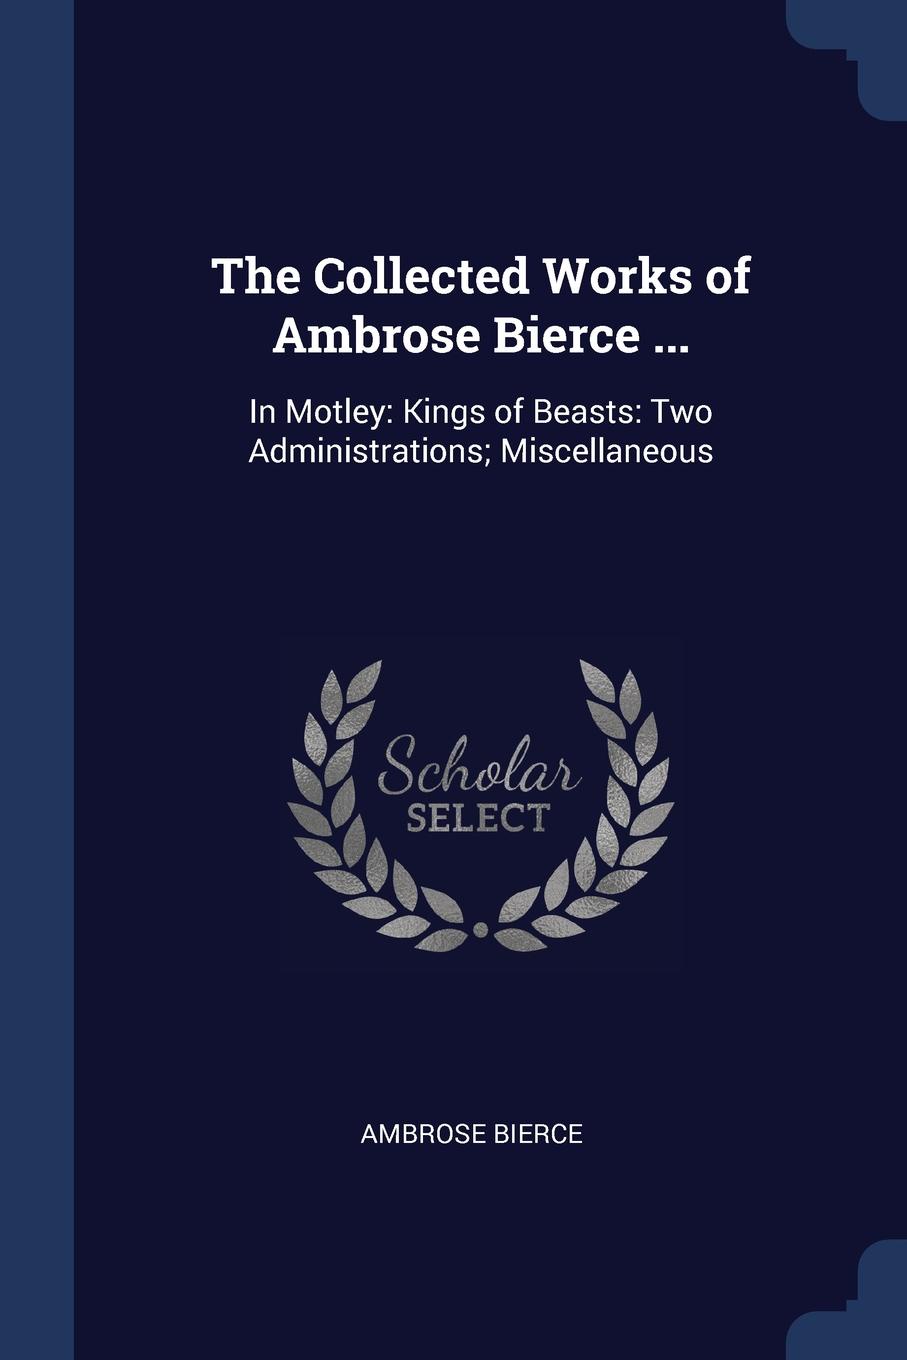 The Collected Works of Ambrose Bierce ... In Motley: Kings of Beasts: Two Administrations; Miscellaneous